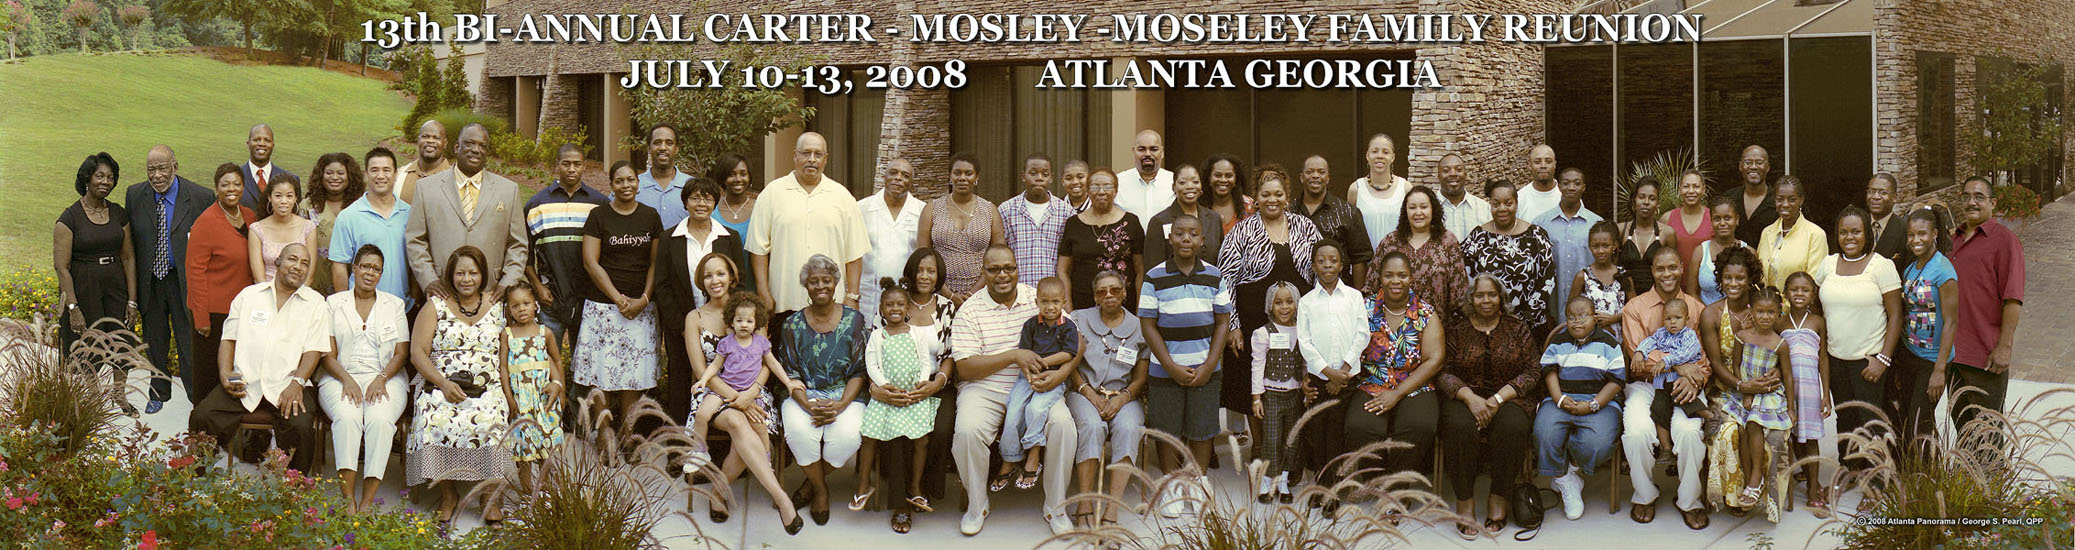 Carter-Mosely_Family_Reunion_Photograph